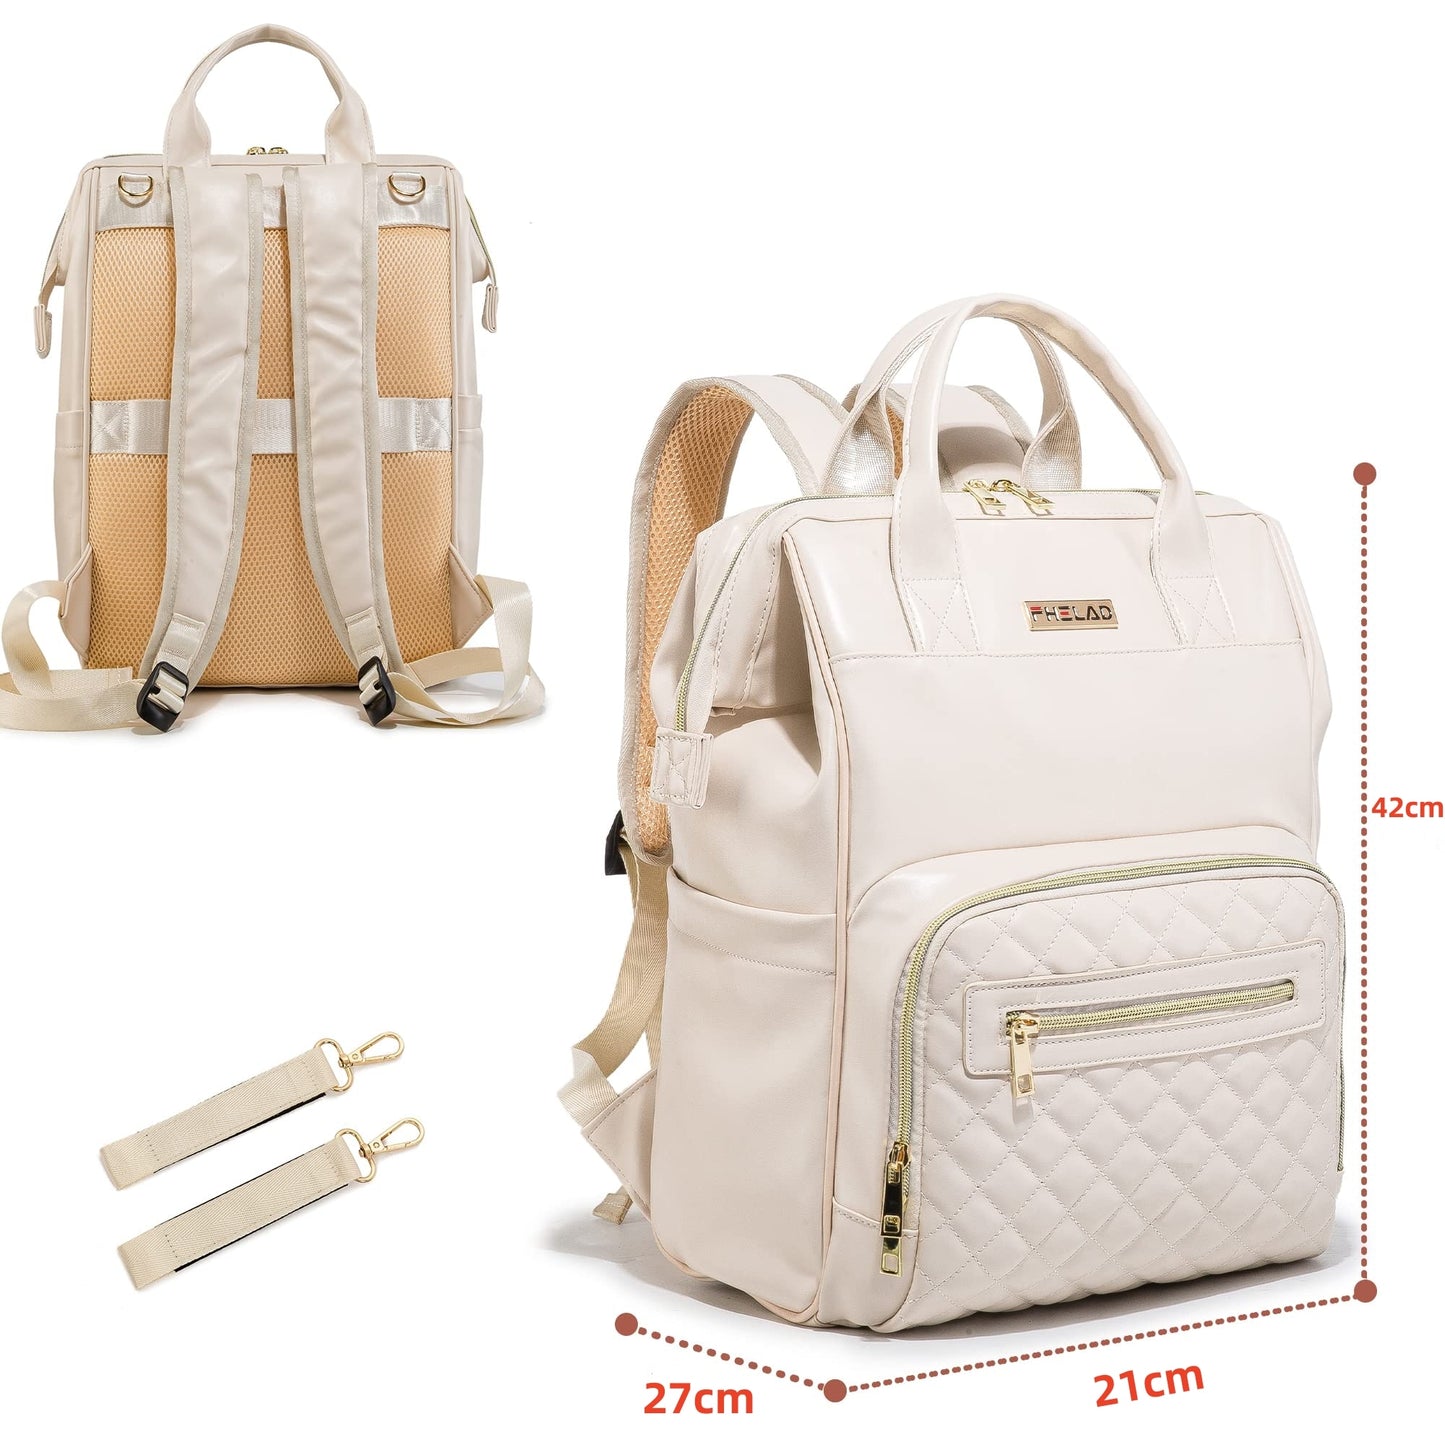 The Everyday Mum White Waterproof Sectional Diaper Backpack-PU Leather